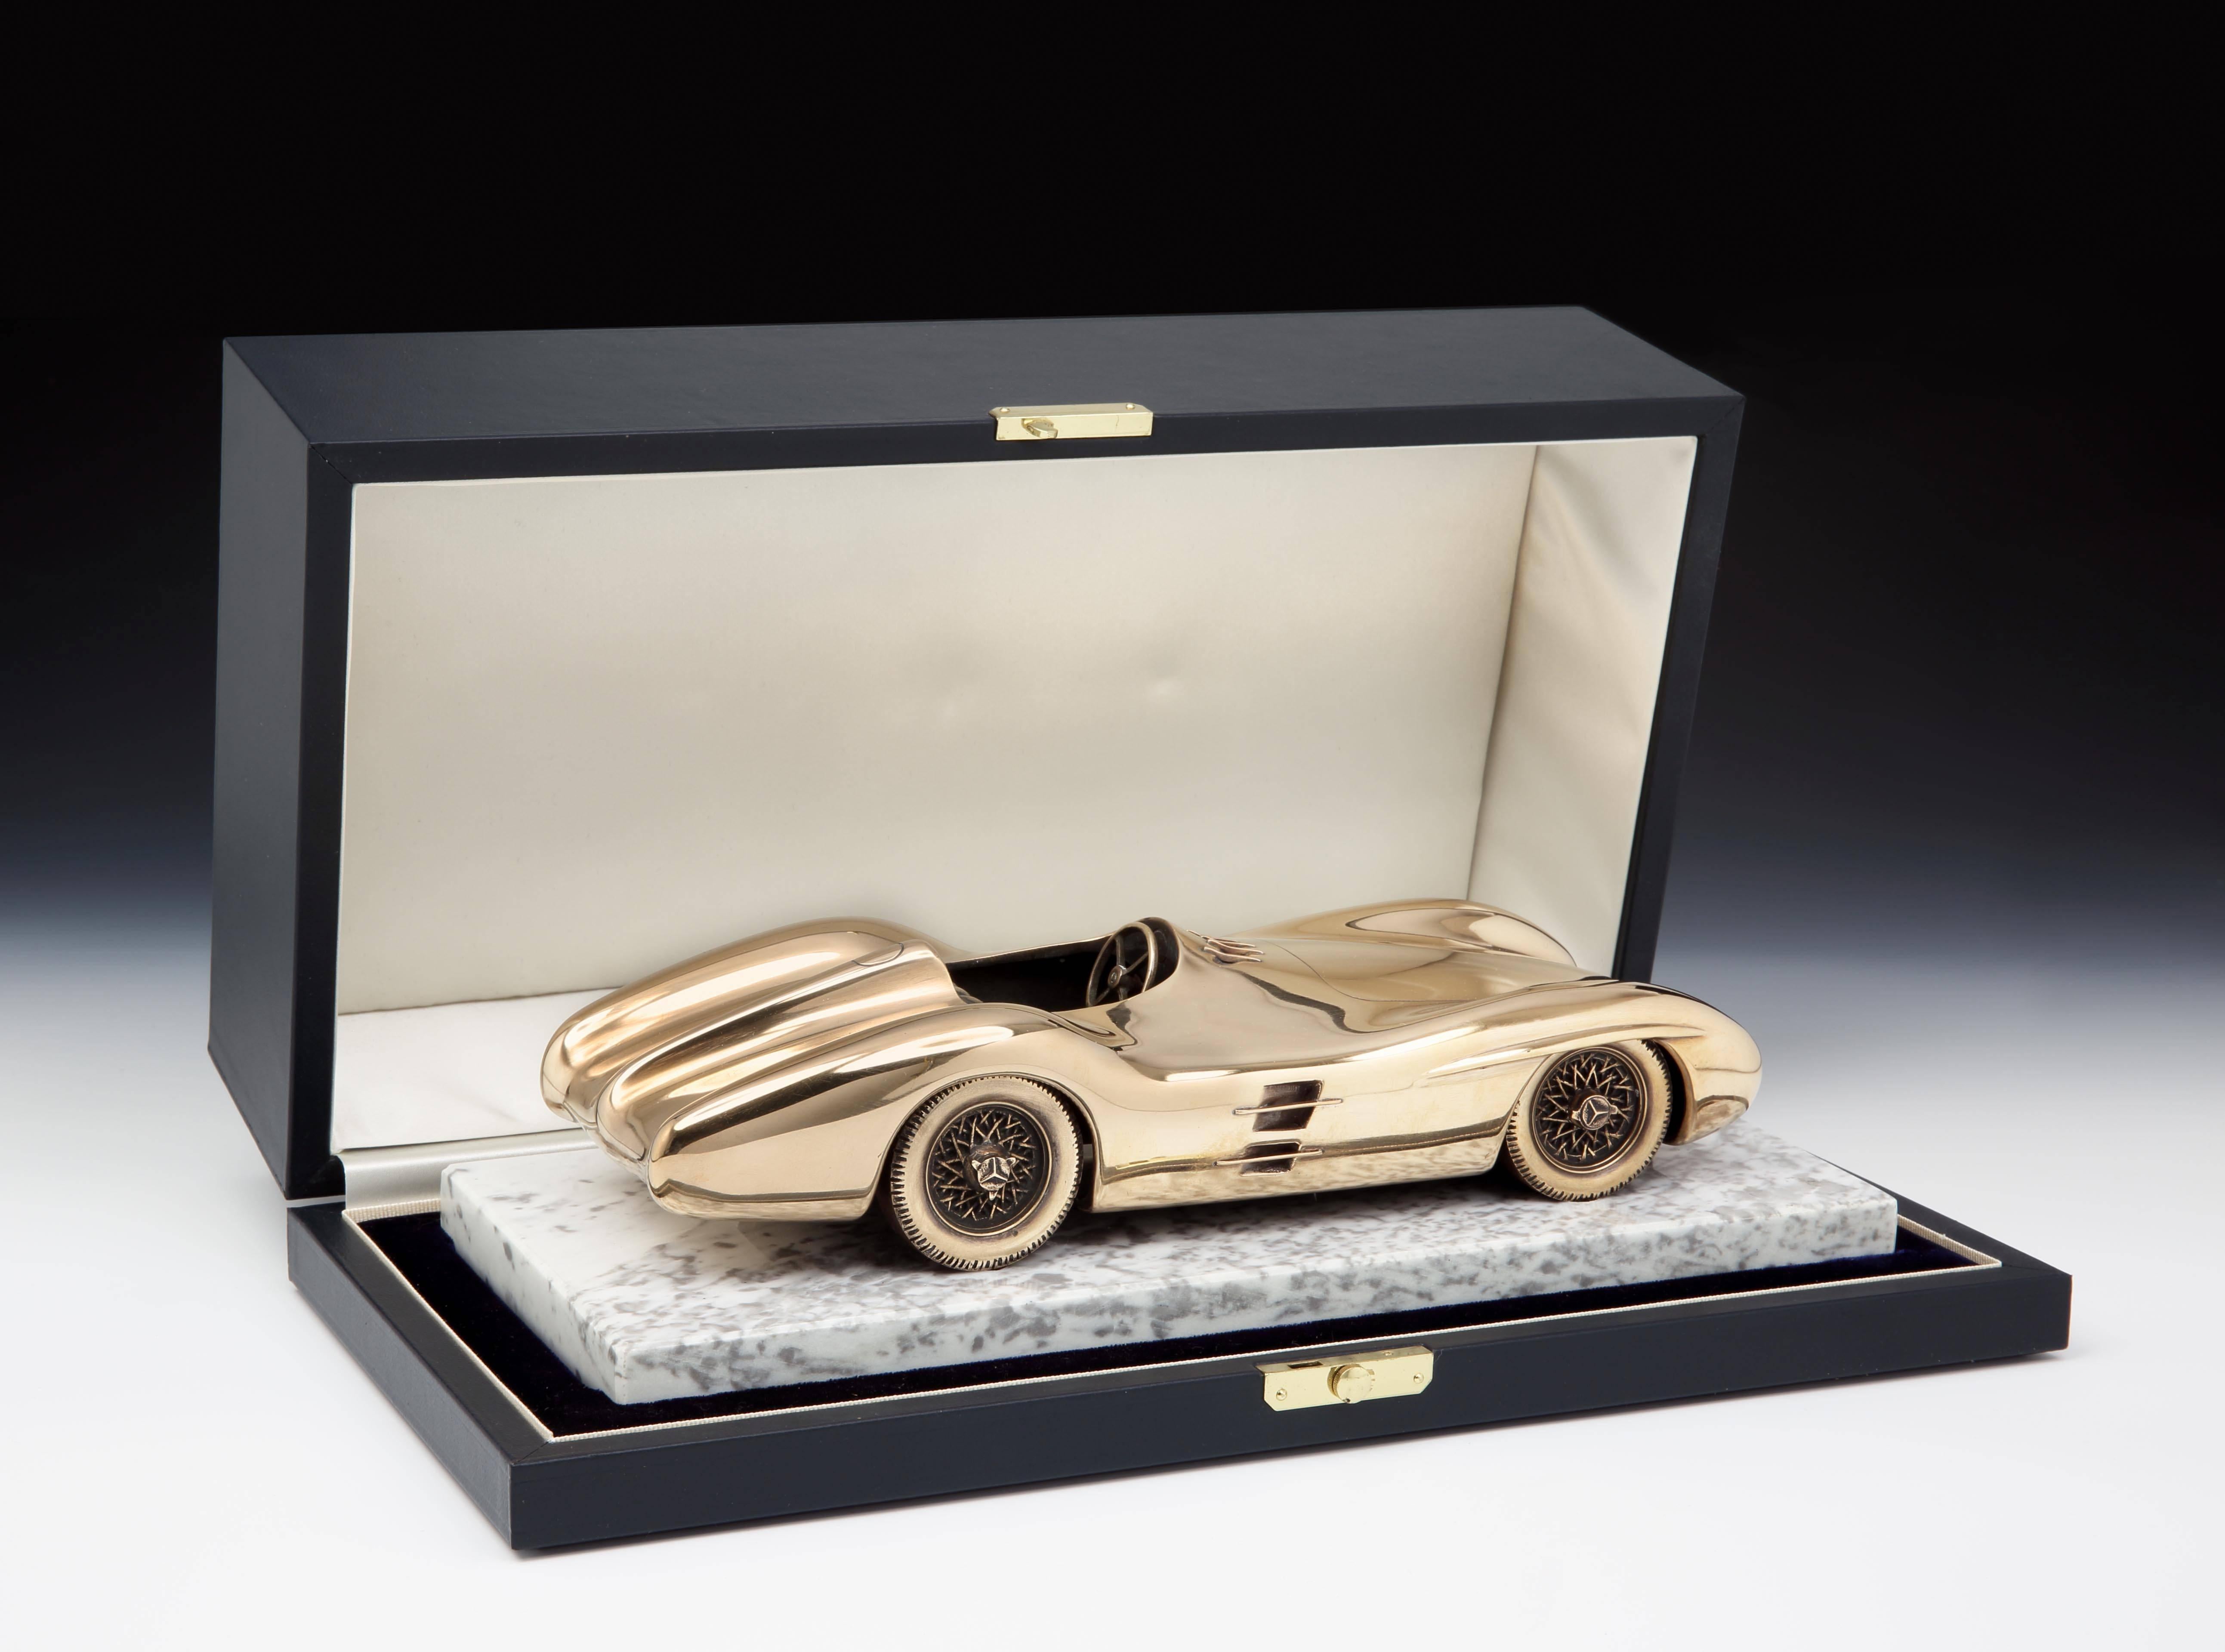 Mercedes-Benz Typ W196 Streamliner bronze

A fine and important 1955 presentation bronze sculpture in the form of the Mercedes-Benz Typ W196 Grand Prix car (1954-1955), mounted on original white marble plinth with inserted bronze plaque, with